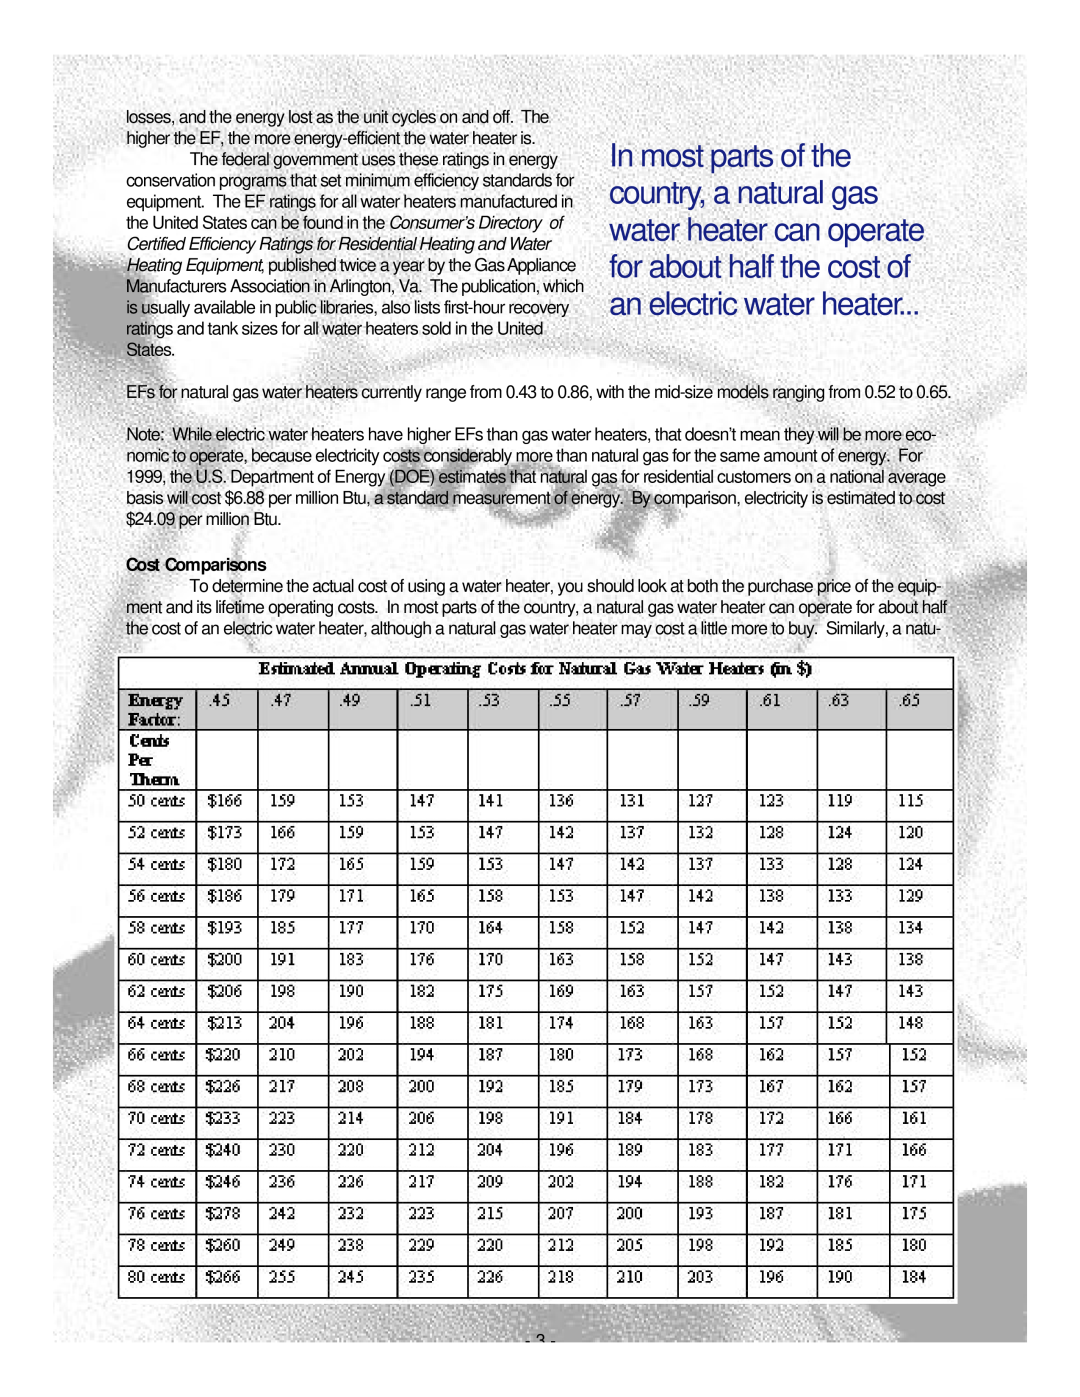 Maytag Natural Gas Water Heaters manual Cost Comparisons 